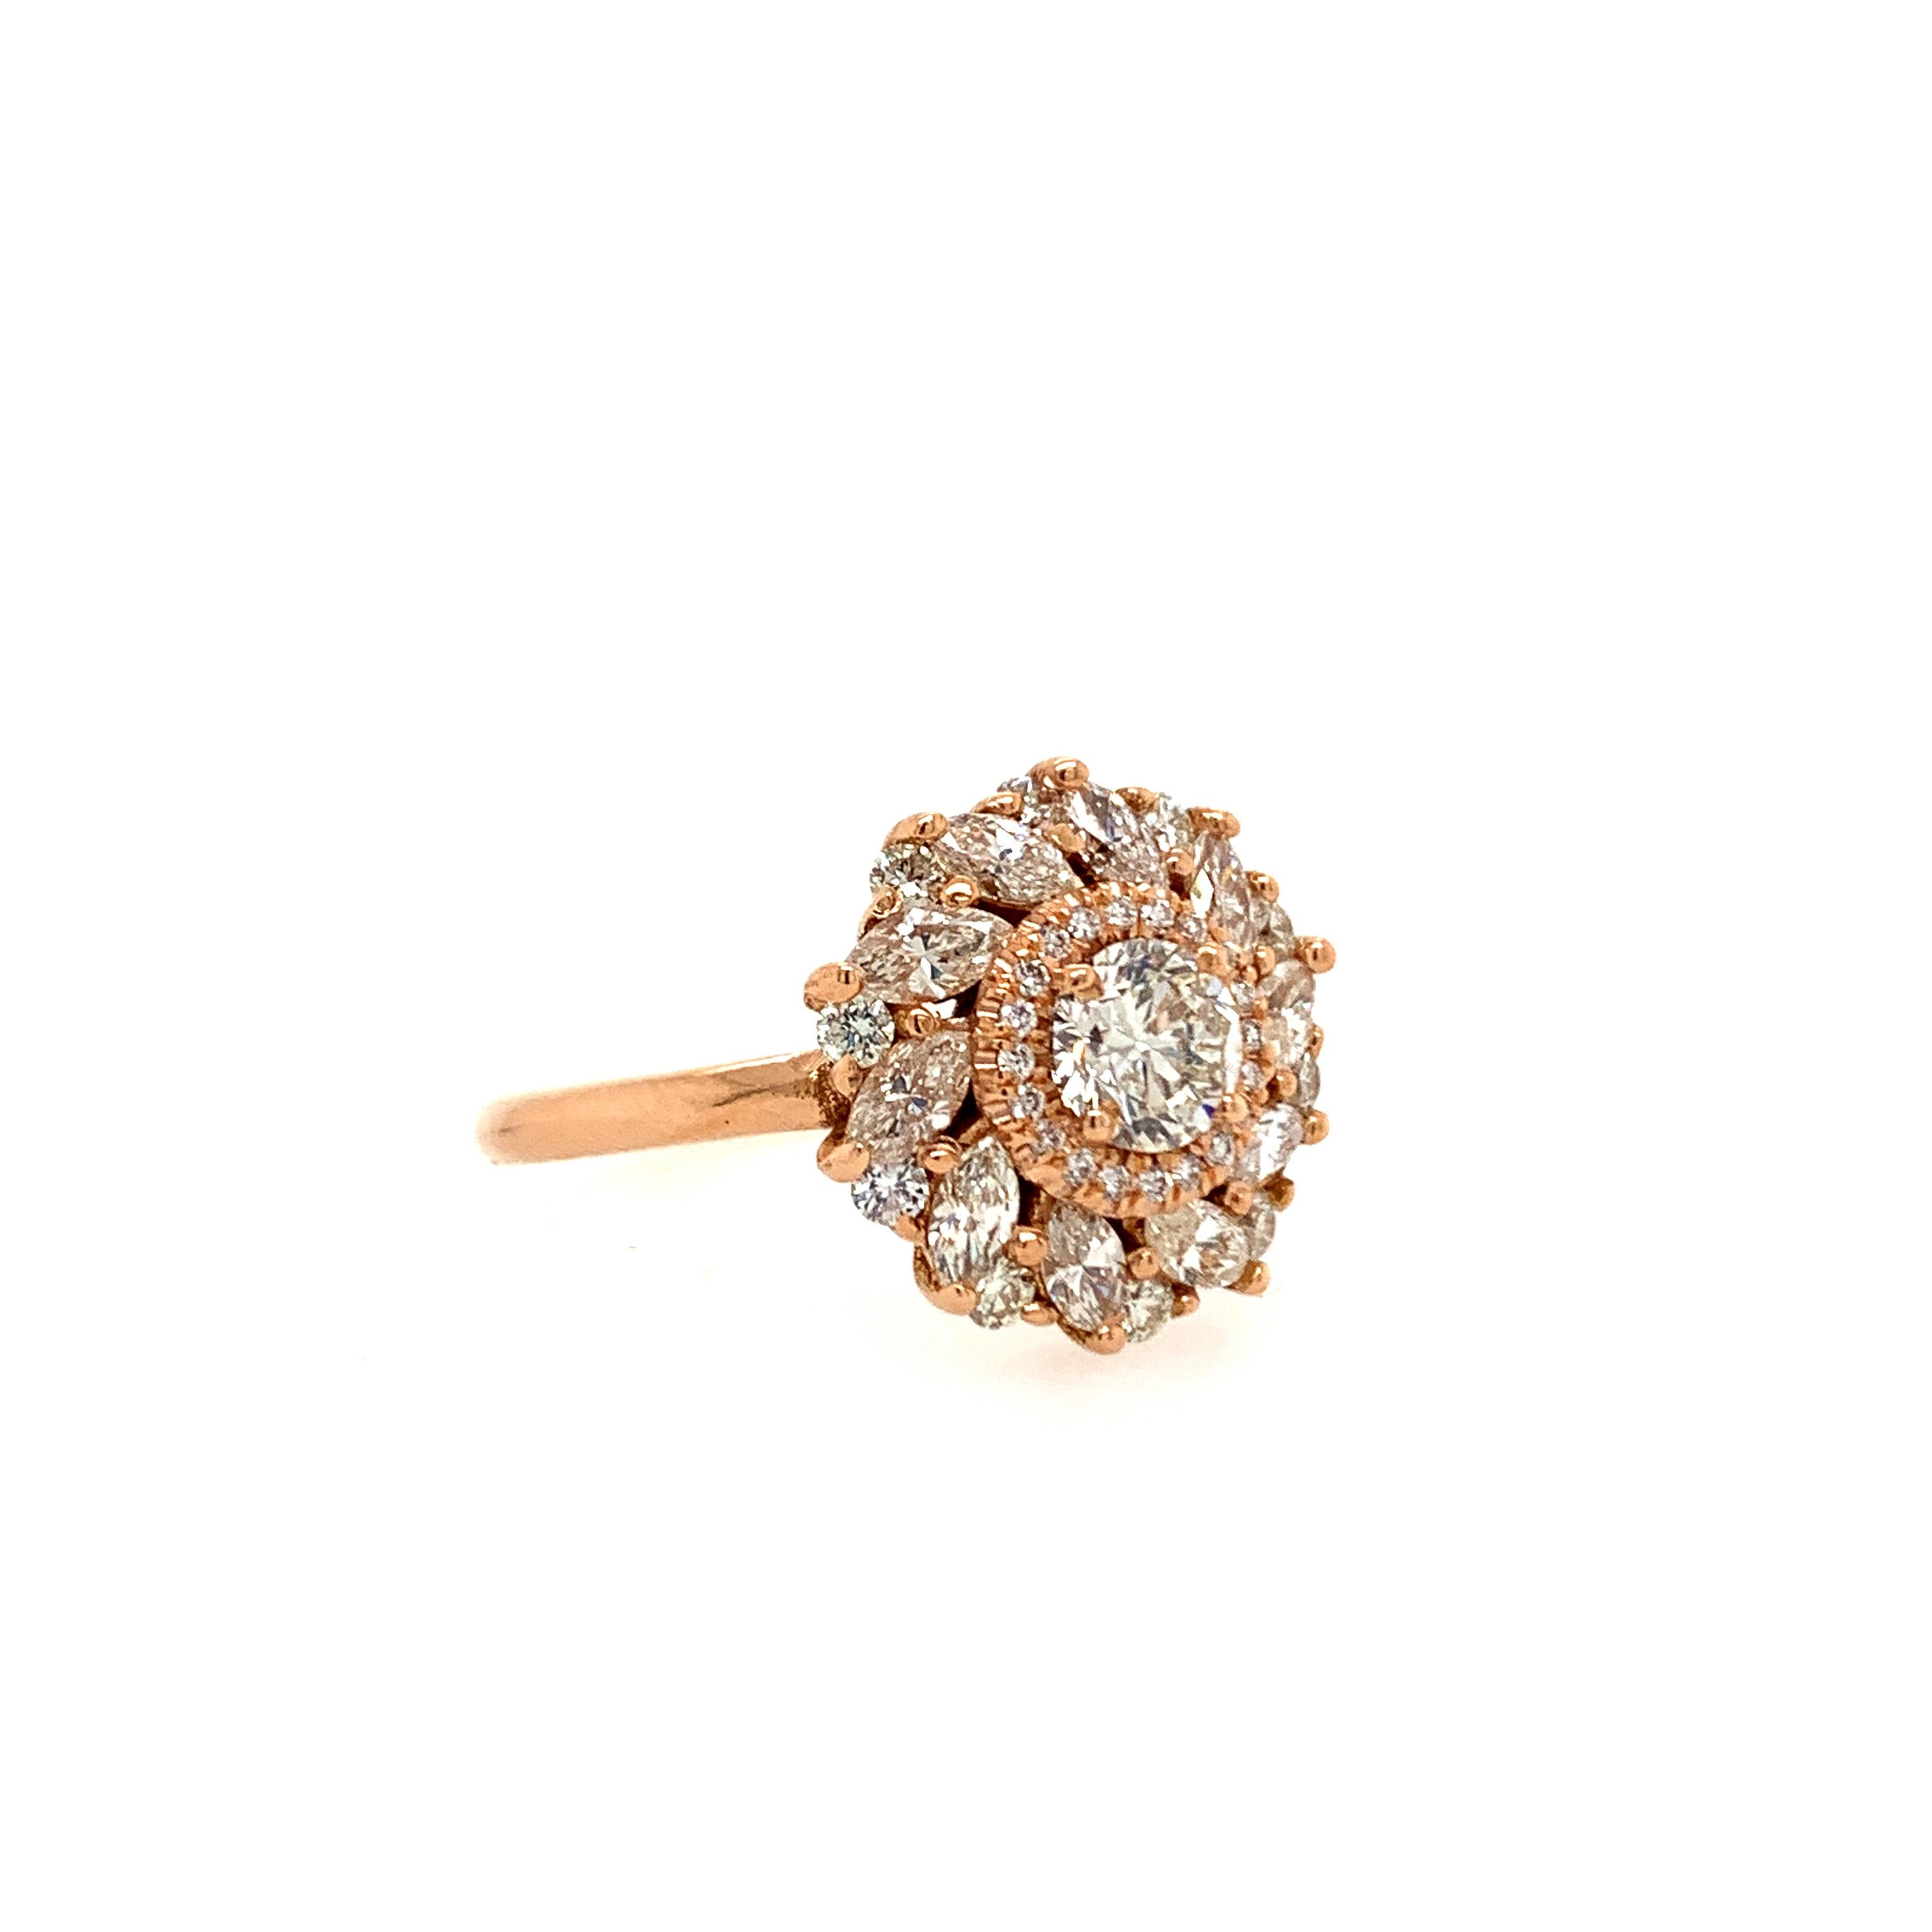 This beautiful ring flaunts a 1.48 carat round natural white diamond surrounded by a diamond halo and set atop a bed of round and marquise diamonds.

Set in 14K rose gold.

Center stone: Natural white diamond - 0.40 carat, color G, clarity SI1